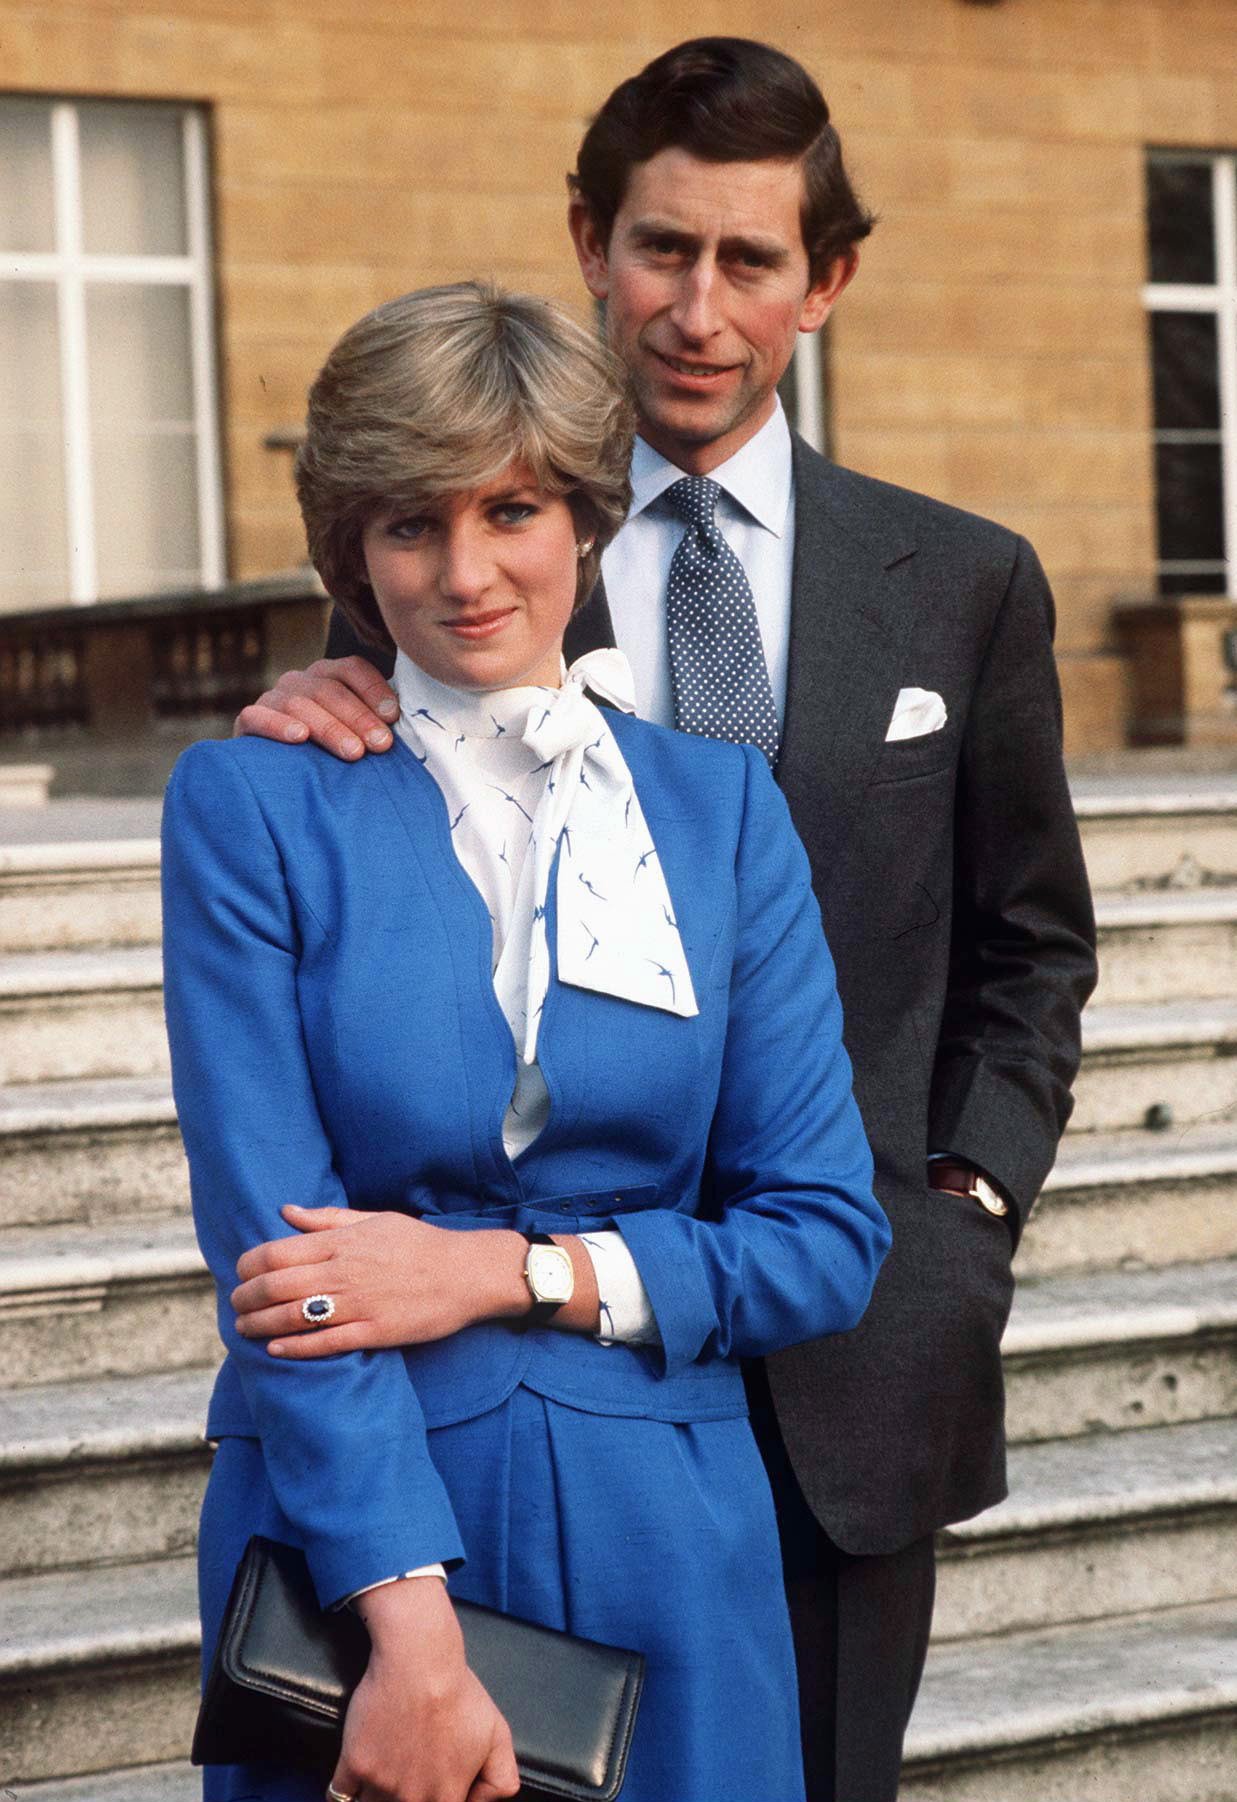 Lady Diana Spencer Reveals Her Sapphire And Diamond Engagement Ring While She And Prince Charles Pose For Photographs In The Grounds Of Buckingham Palace Following The Announcement Of Their Engagement. | Source: Getty Images